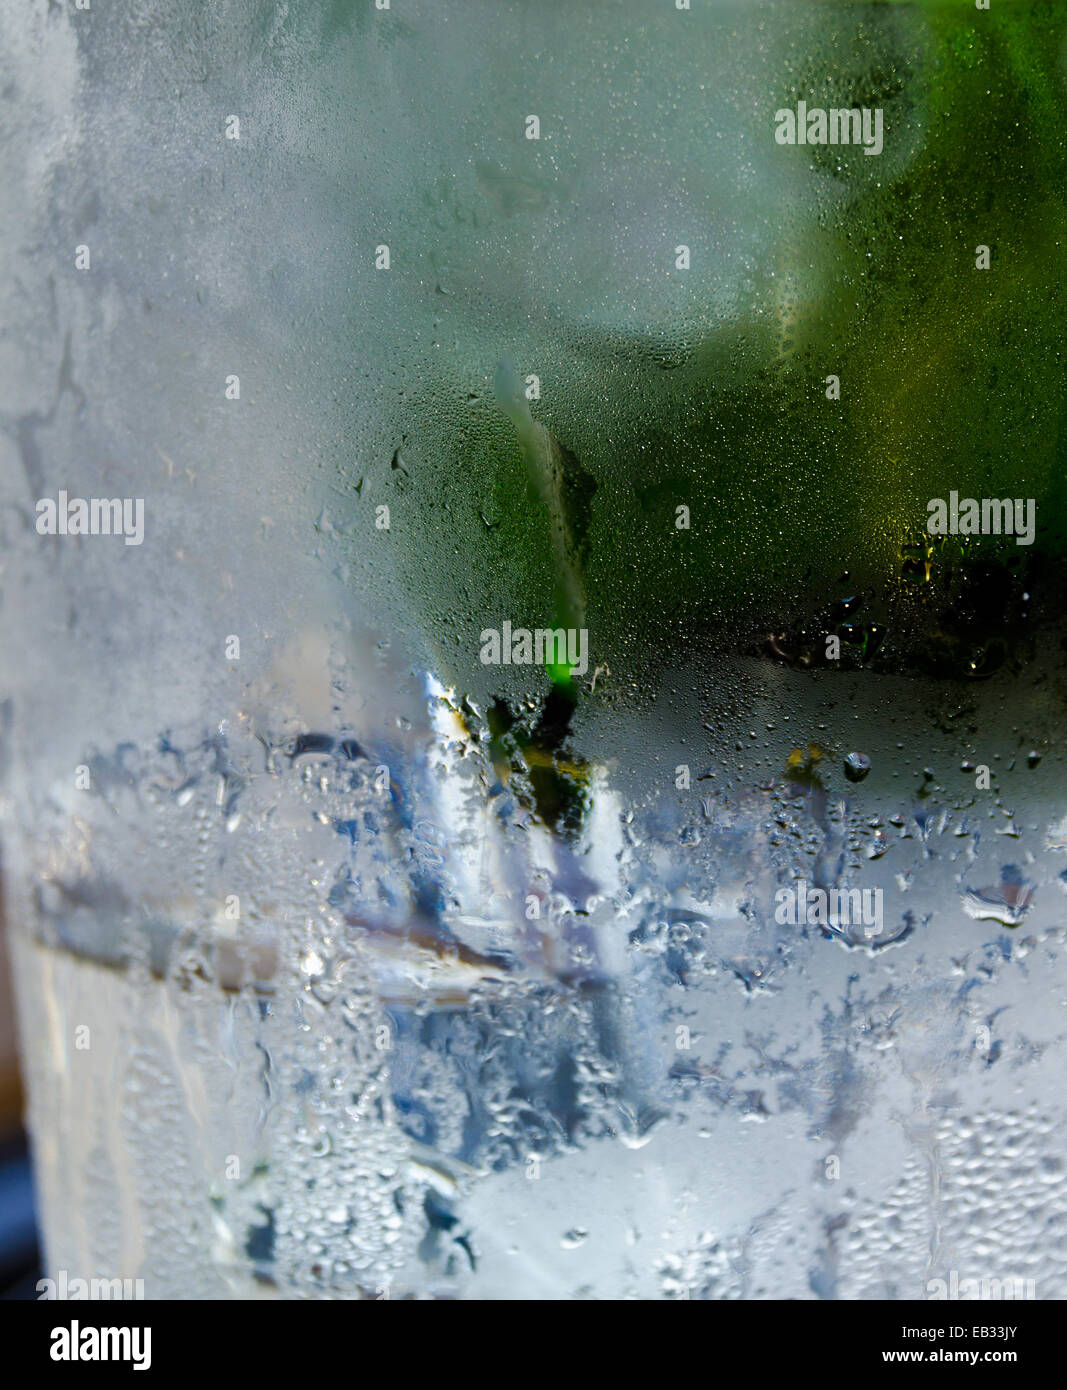 https://c8.alamy.com/comp/EB33JY/condensation-on-outside-of-chilled-glass-containing-ice-and-drinking-EB33JY.jpg